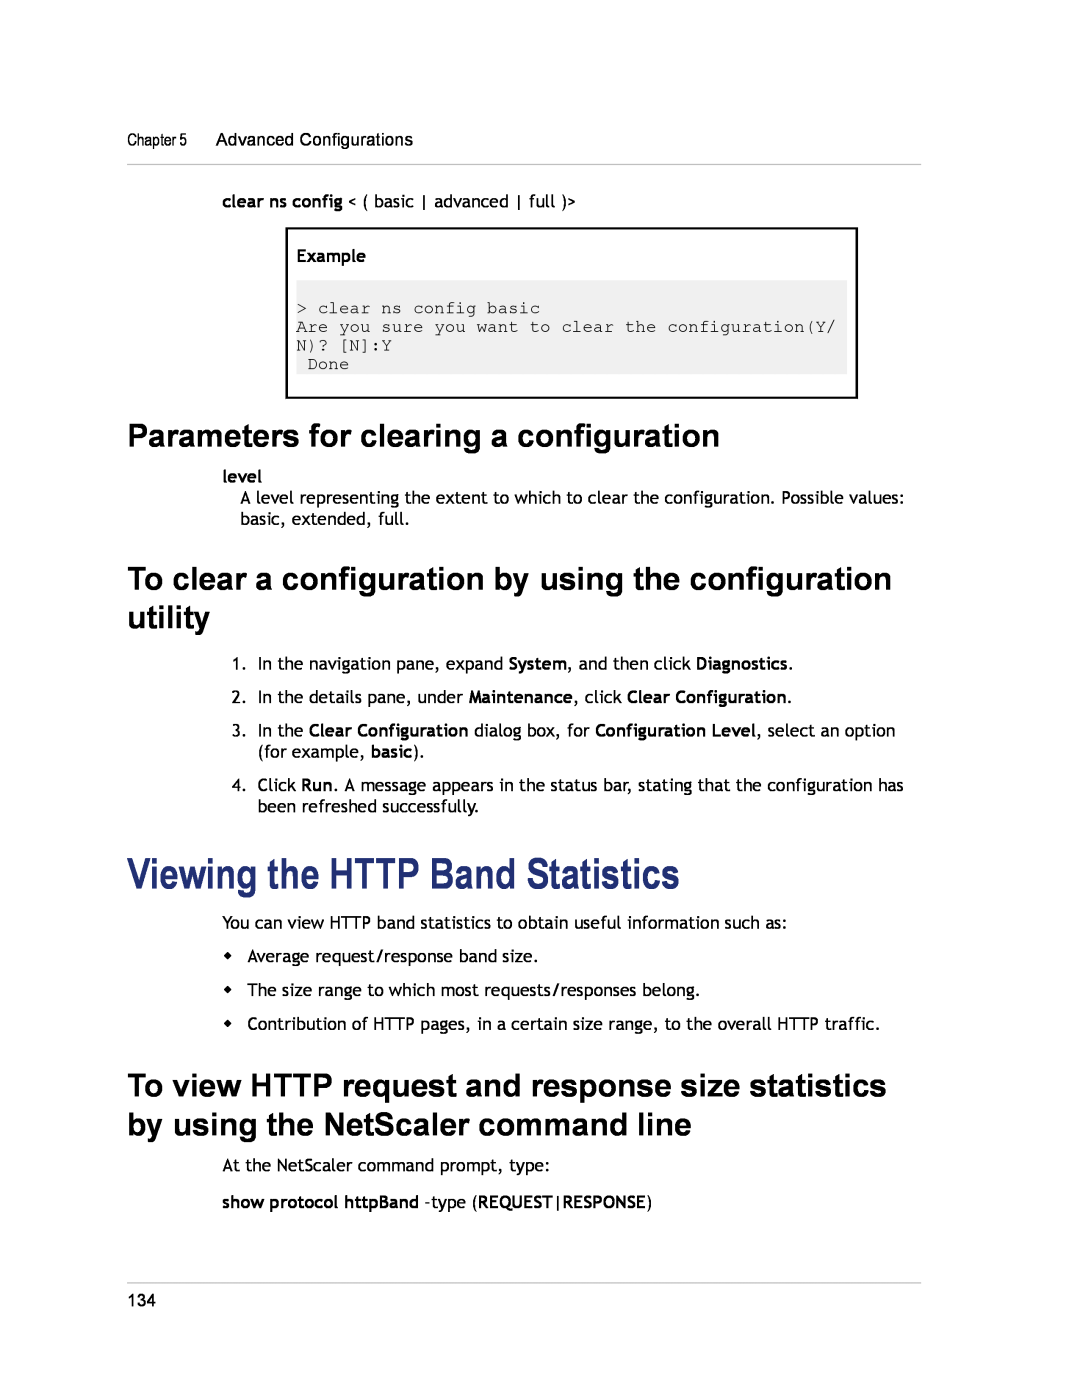 Citrix Systems CITRIX NETSCALER 9.3 manual Viewing the HTTP Band Statistics, Parameters for clearing a configuration, level 